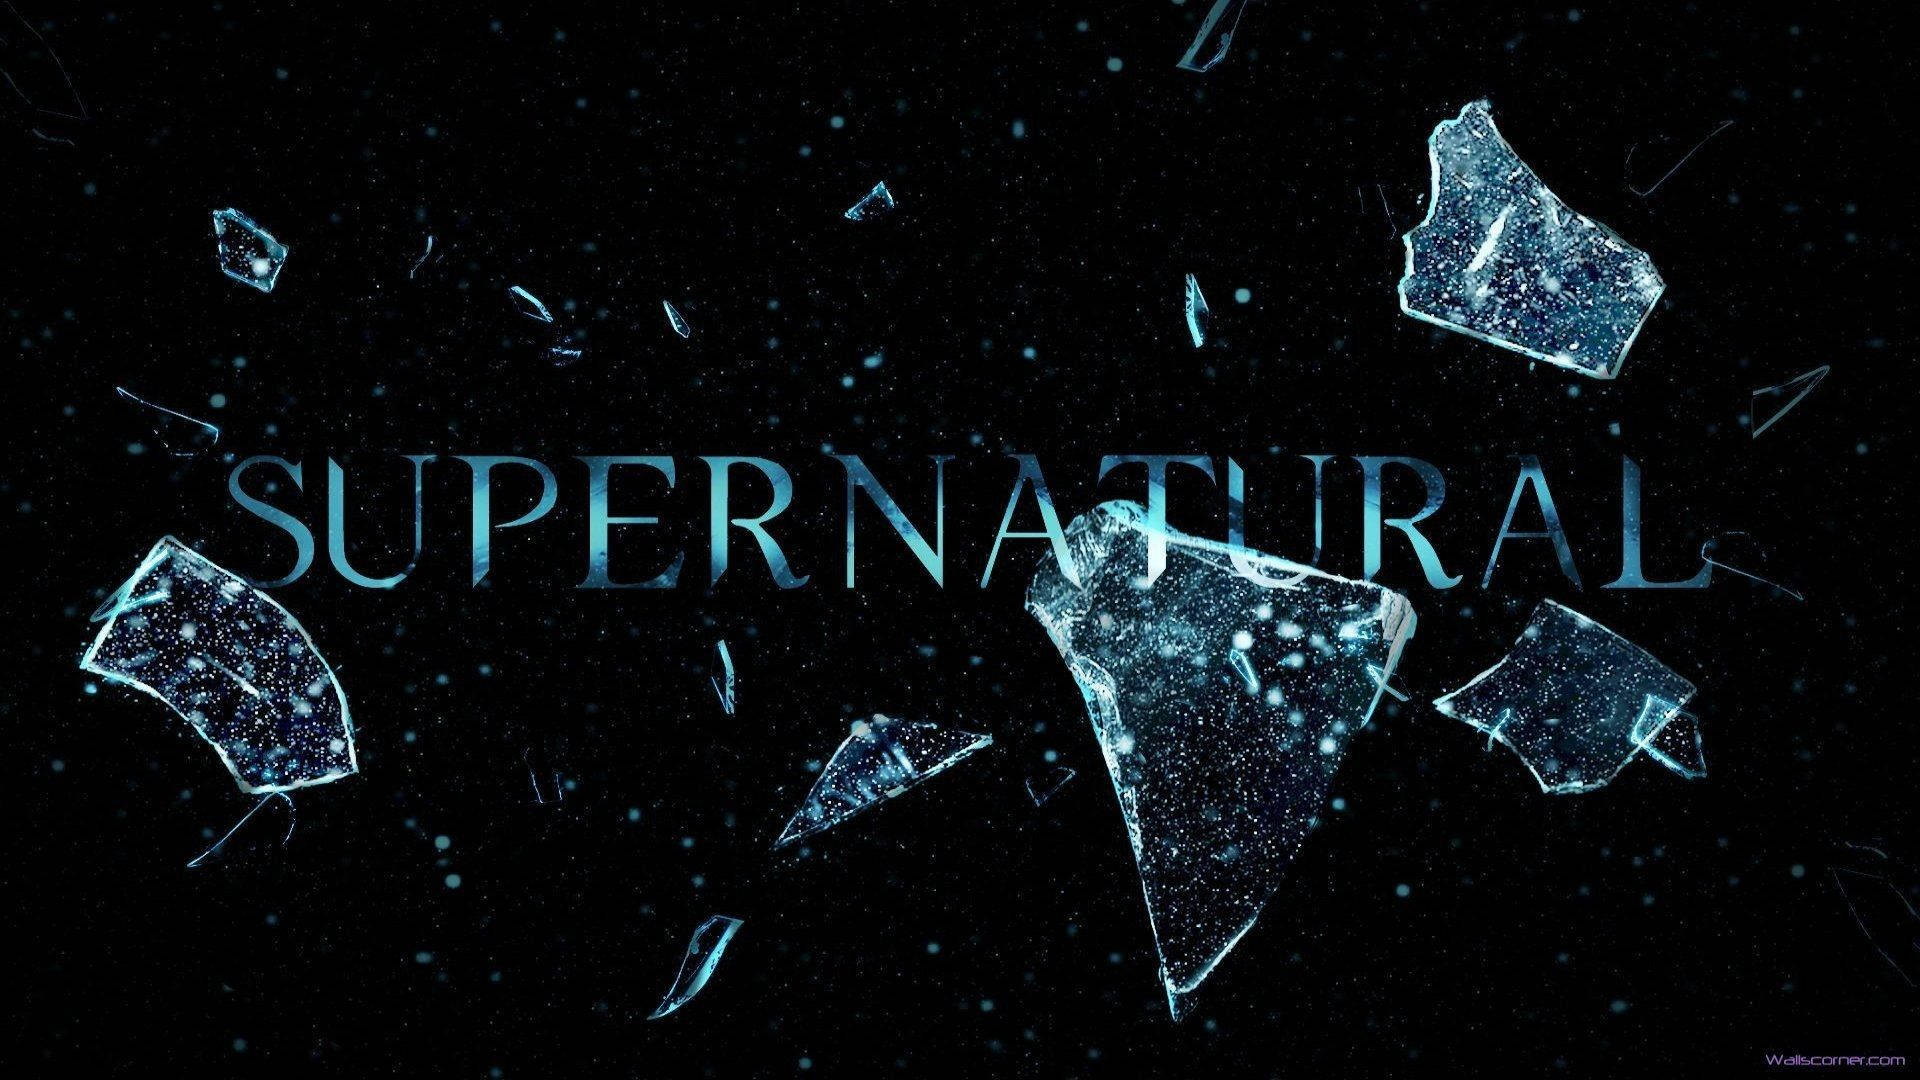 Sam and Dean Winchester Find Their Place in This Supernatural World Wallpaper